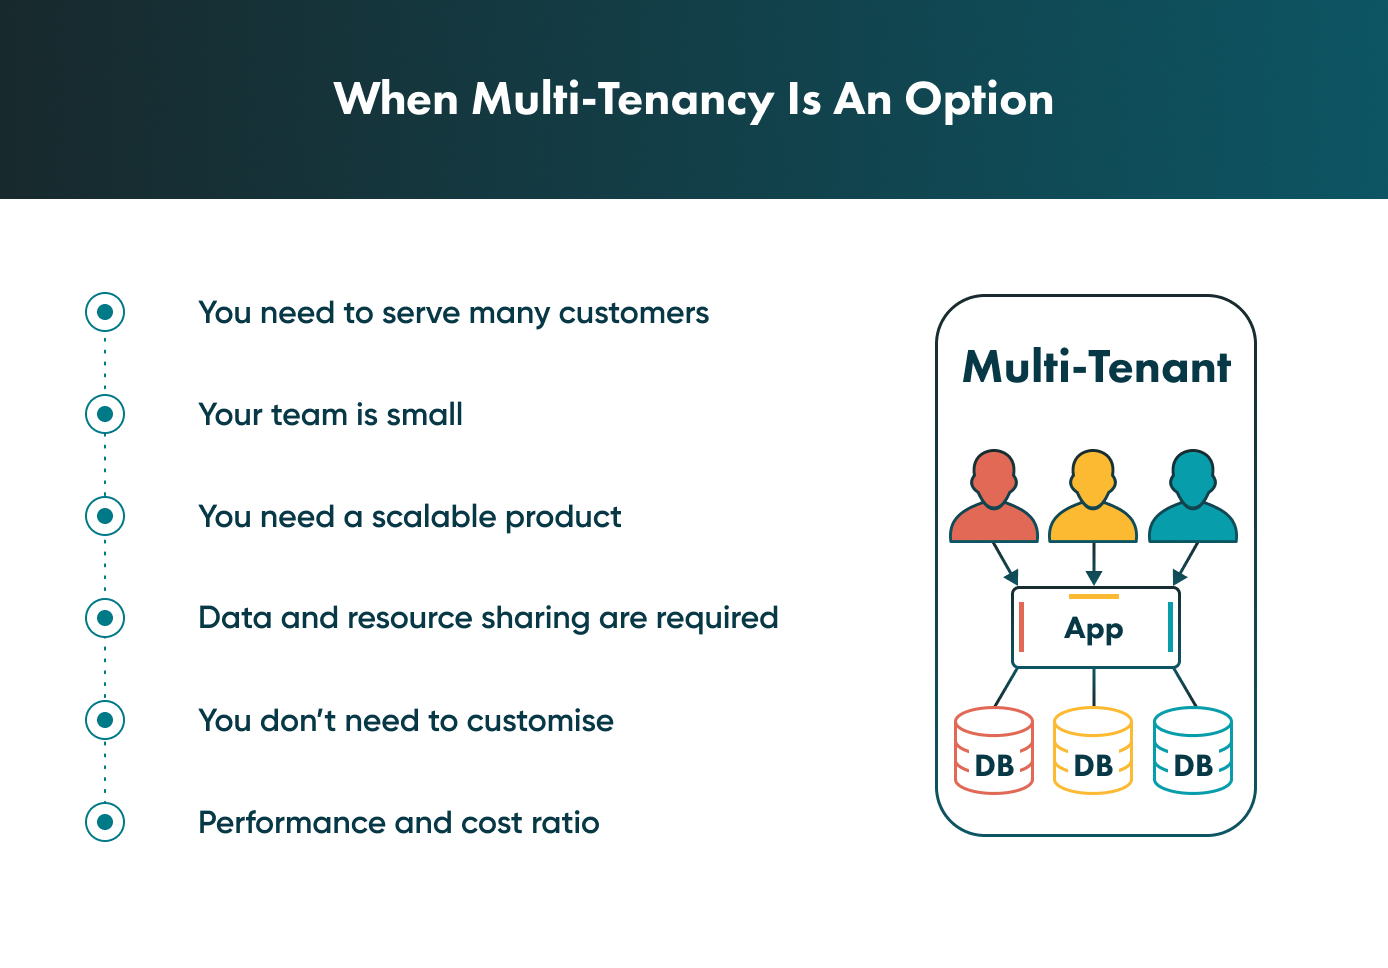 Use Cases Of Multi-Tenancy Will Help You Make The Right Decision 